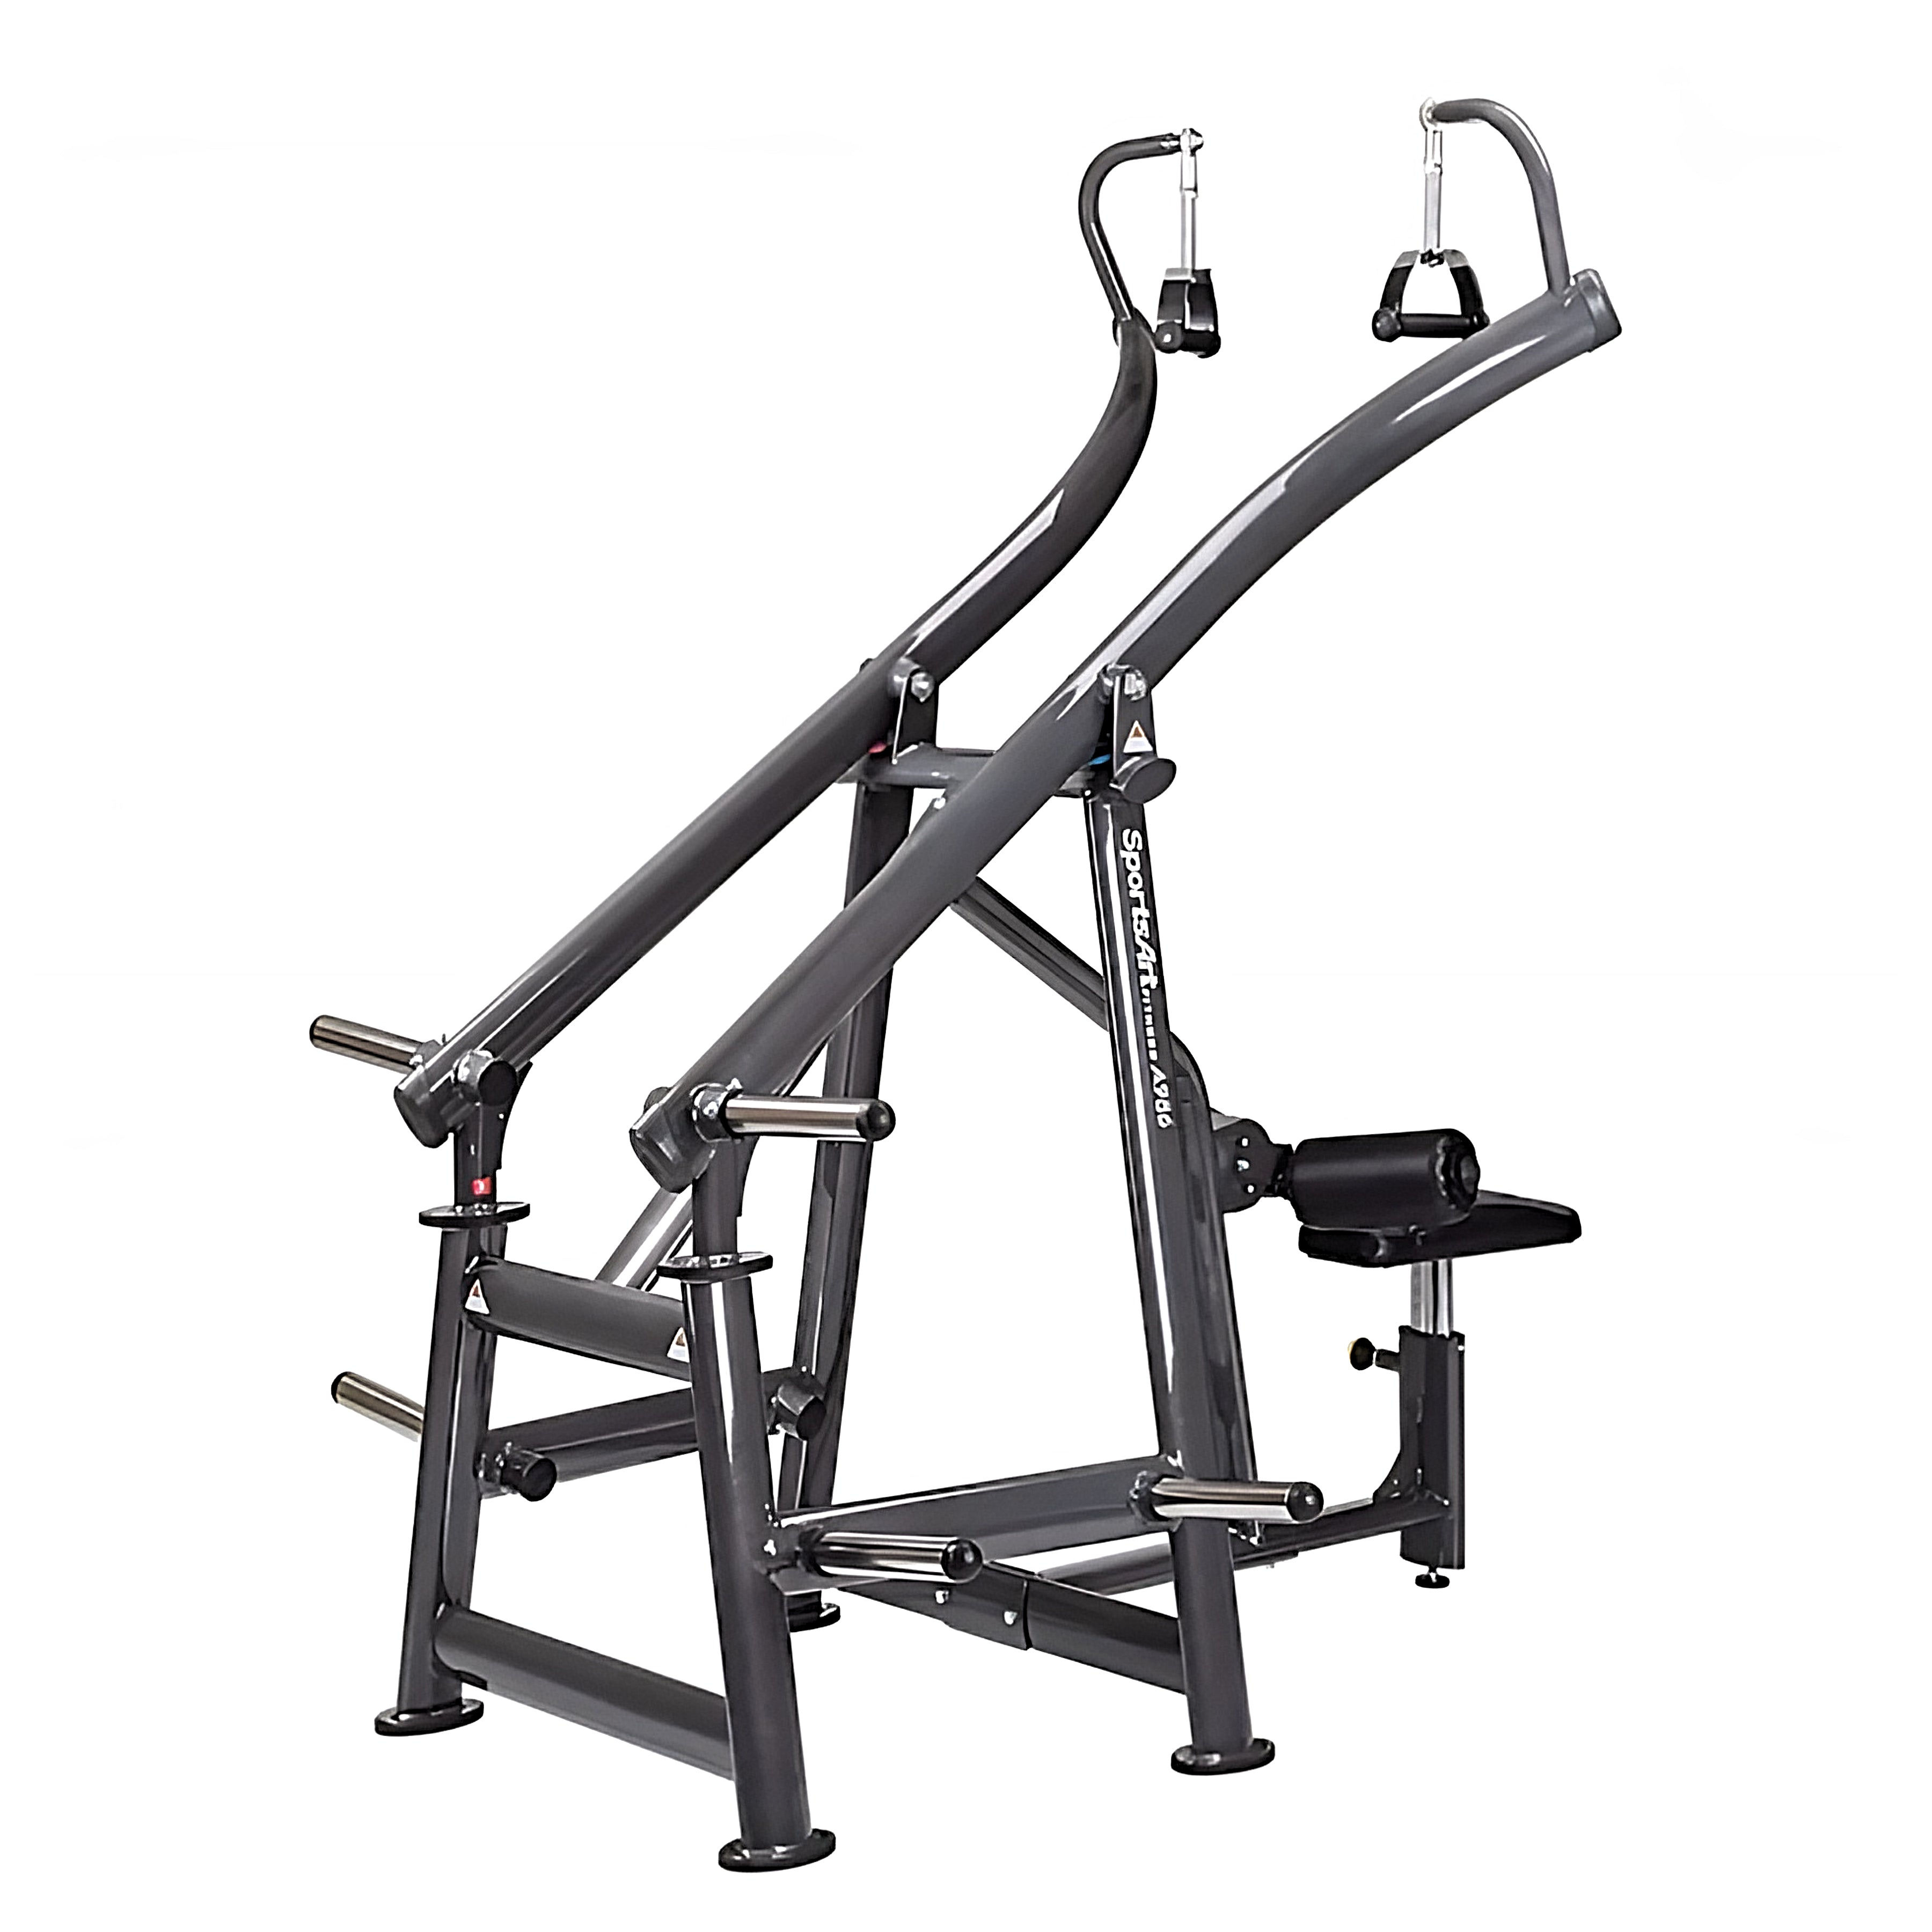 SportsArt Plate Loaded Lat Pulldown A986